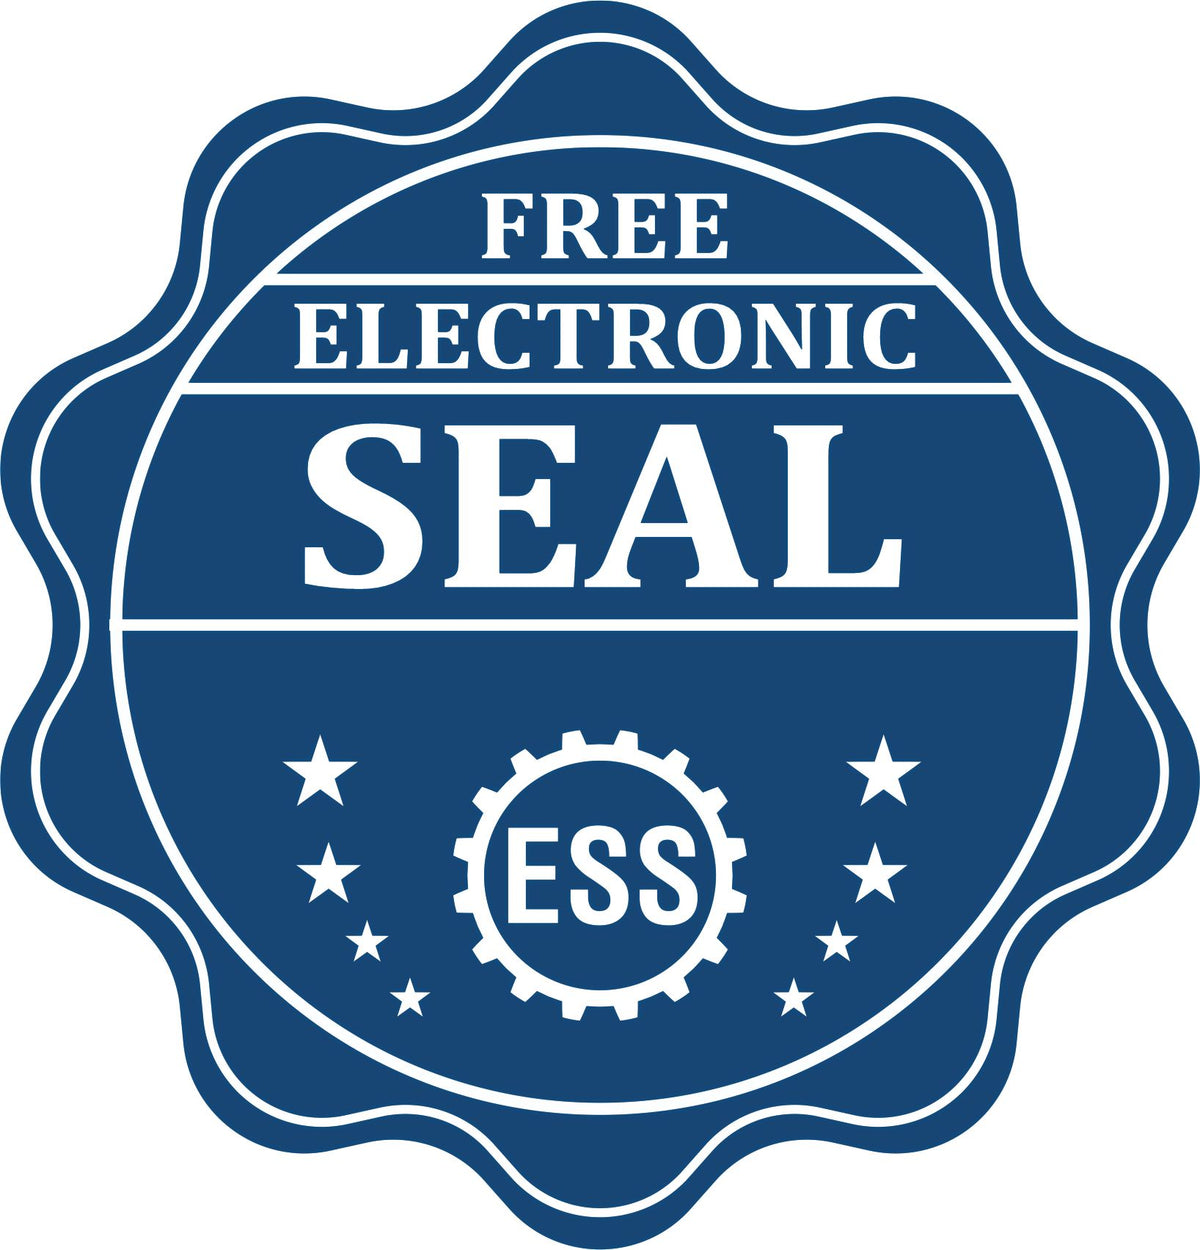 A badge showing a free electronic seal for the Handheld Washington Architect Seal Embosser with stars and the ESS gear on the emblem.